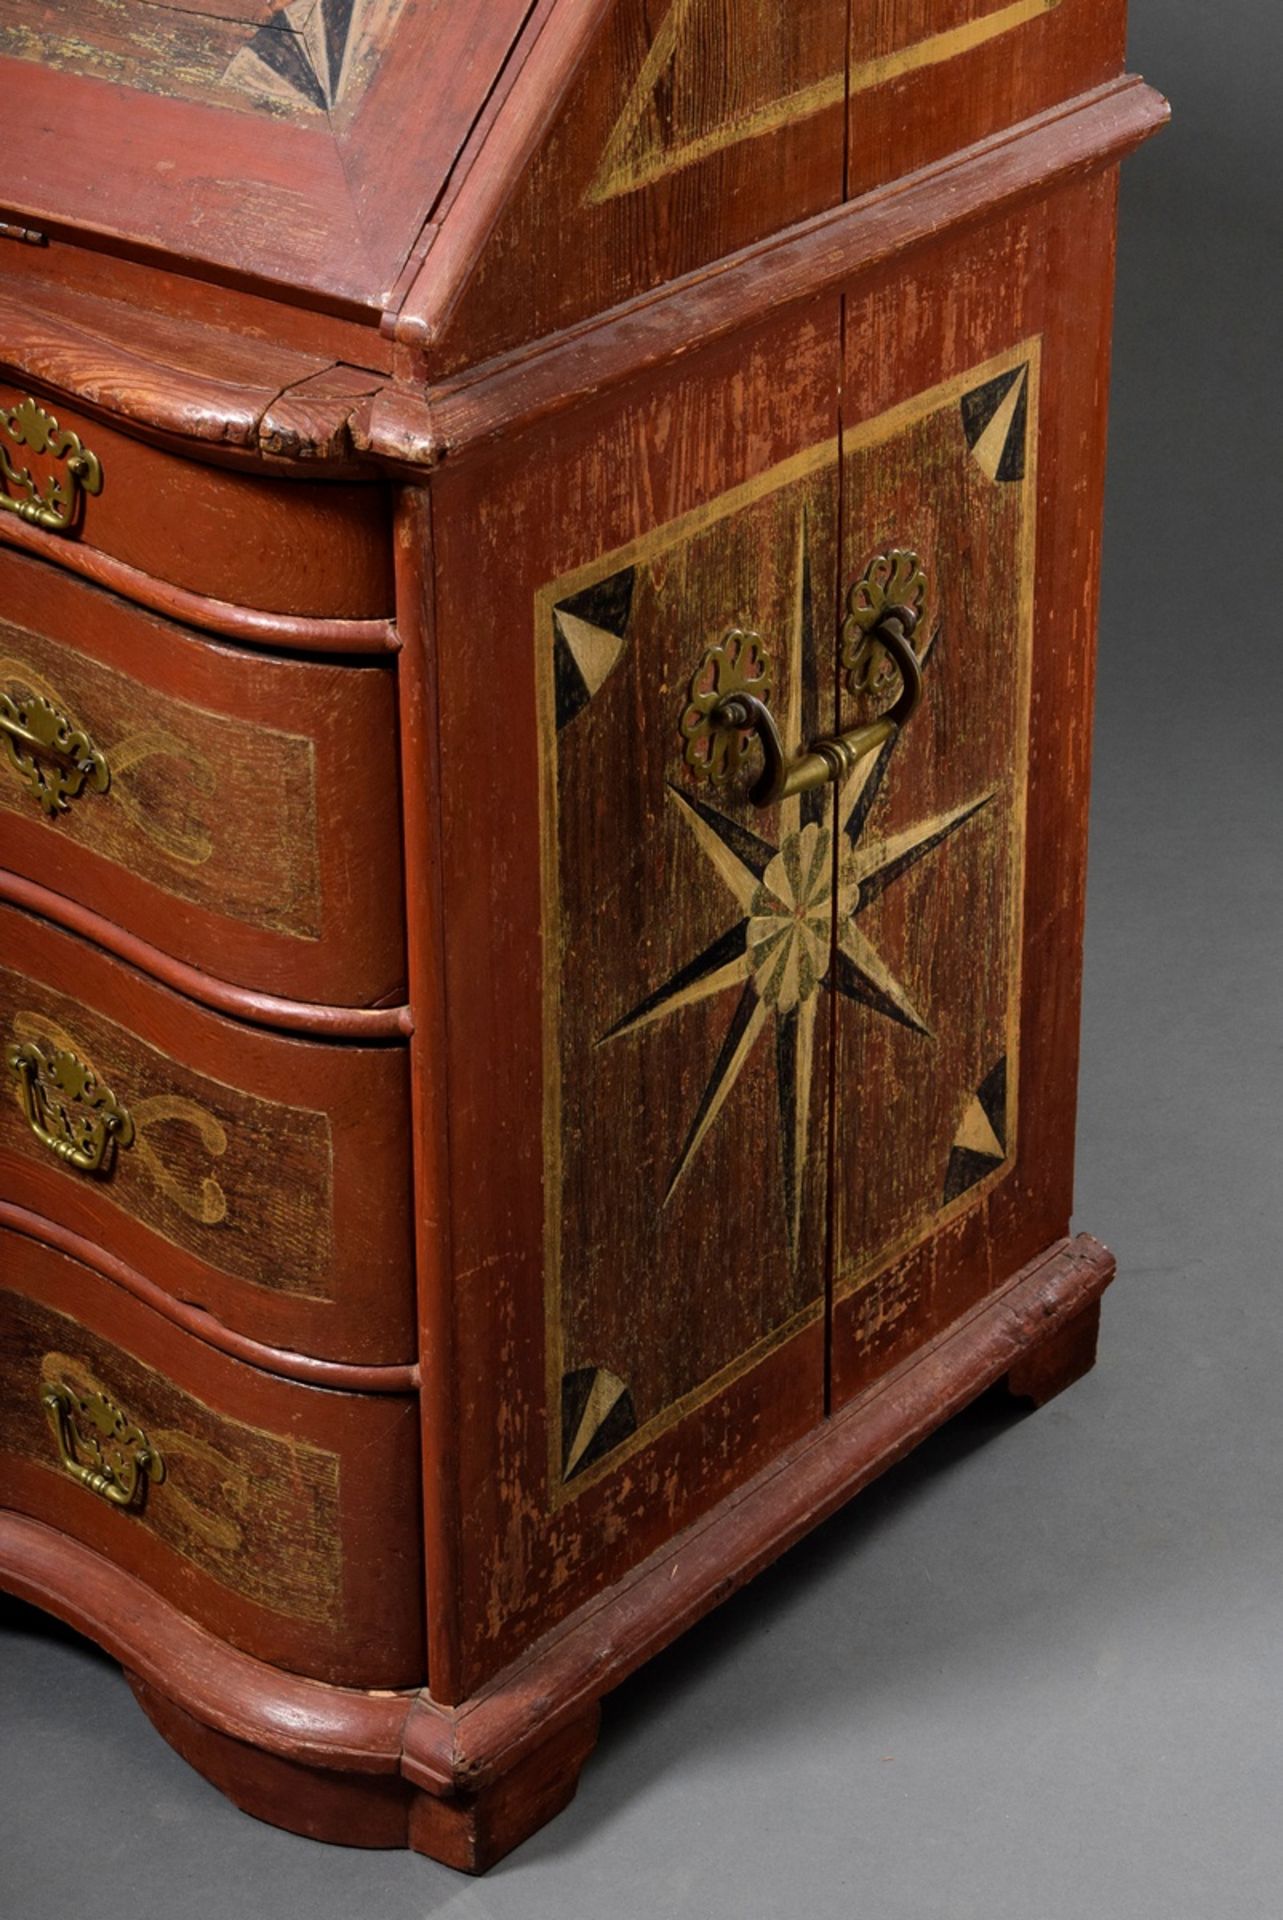 Rustic Danish secretary with slanted flap, star decoration, red/gold original frame and fittings as - Image 3 of 16